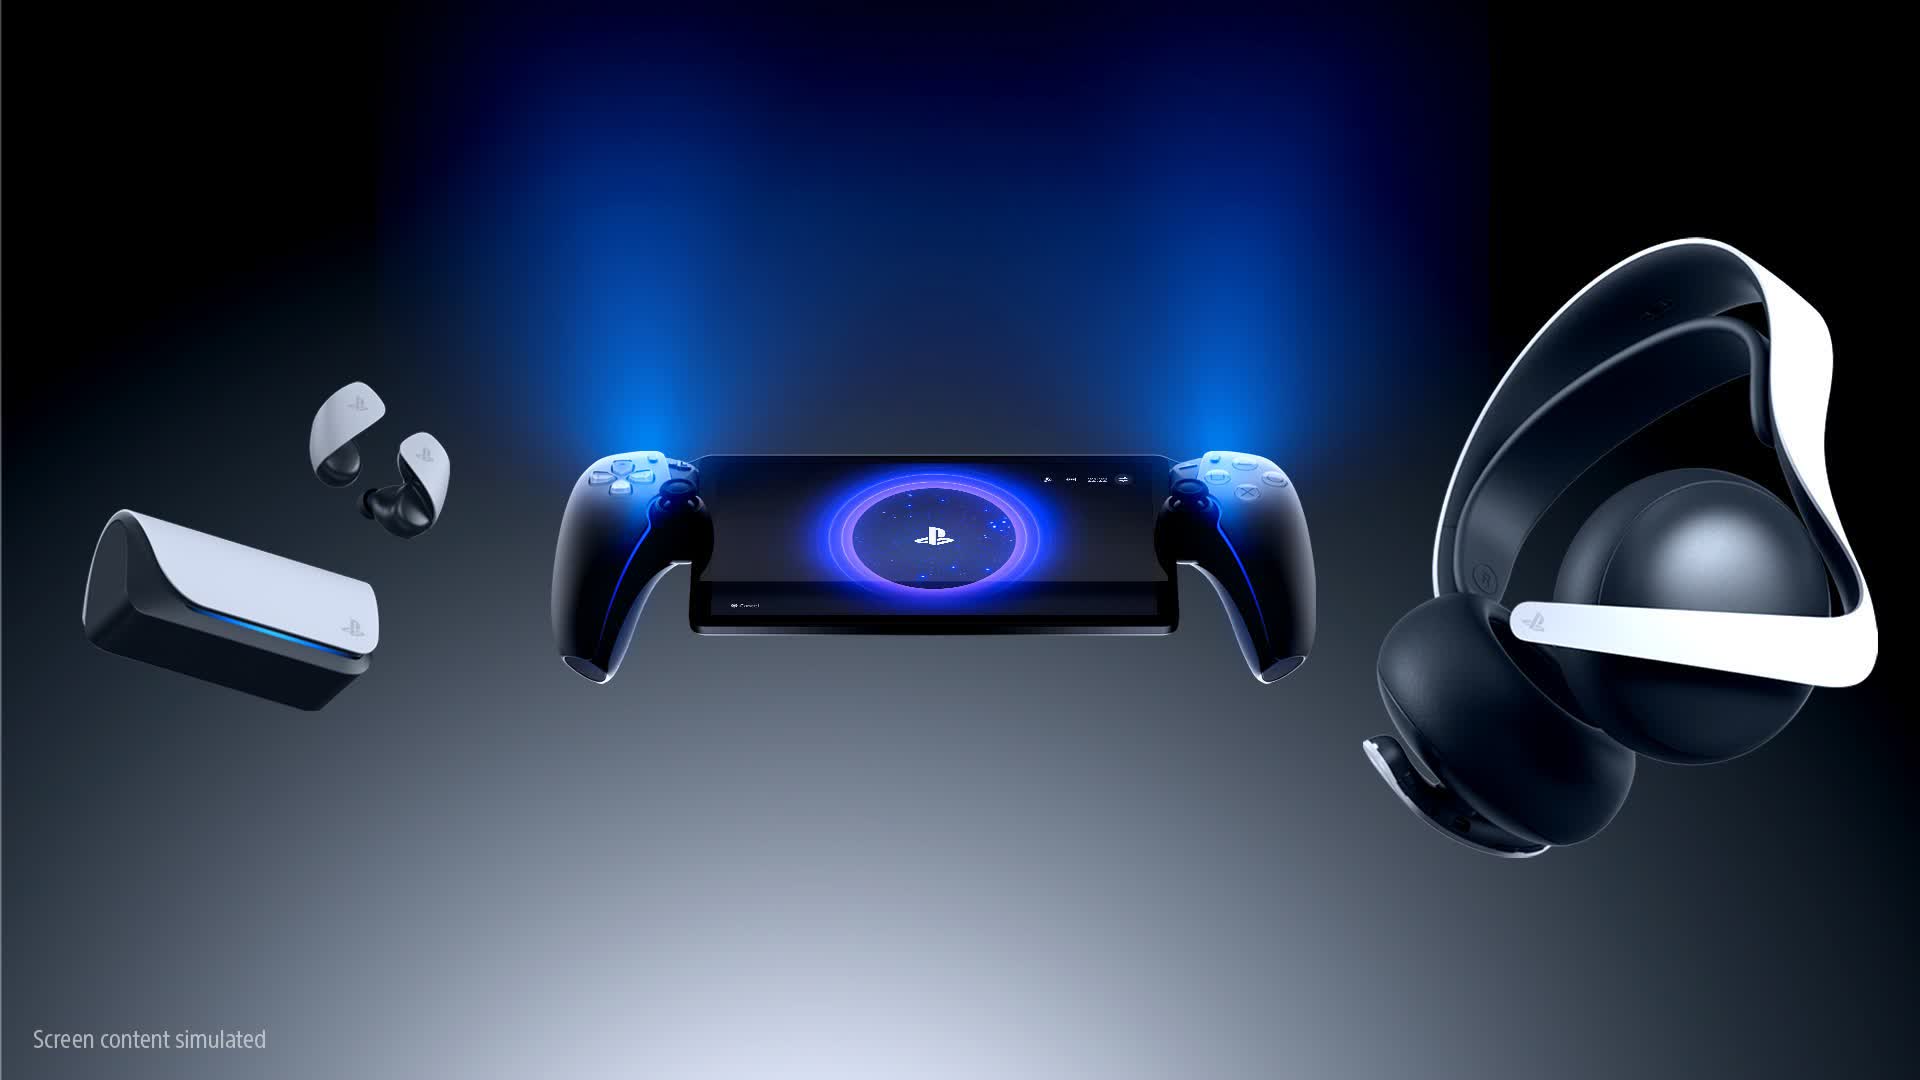 Sony reveals the PlayStation Portal arriving later this year for $199